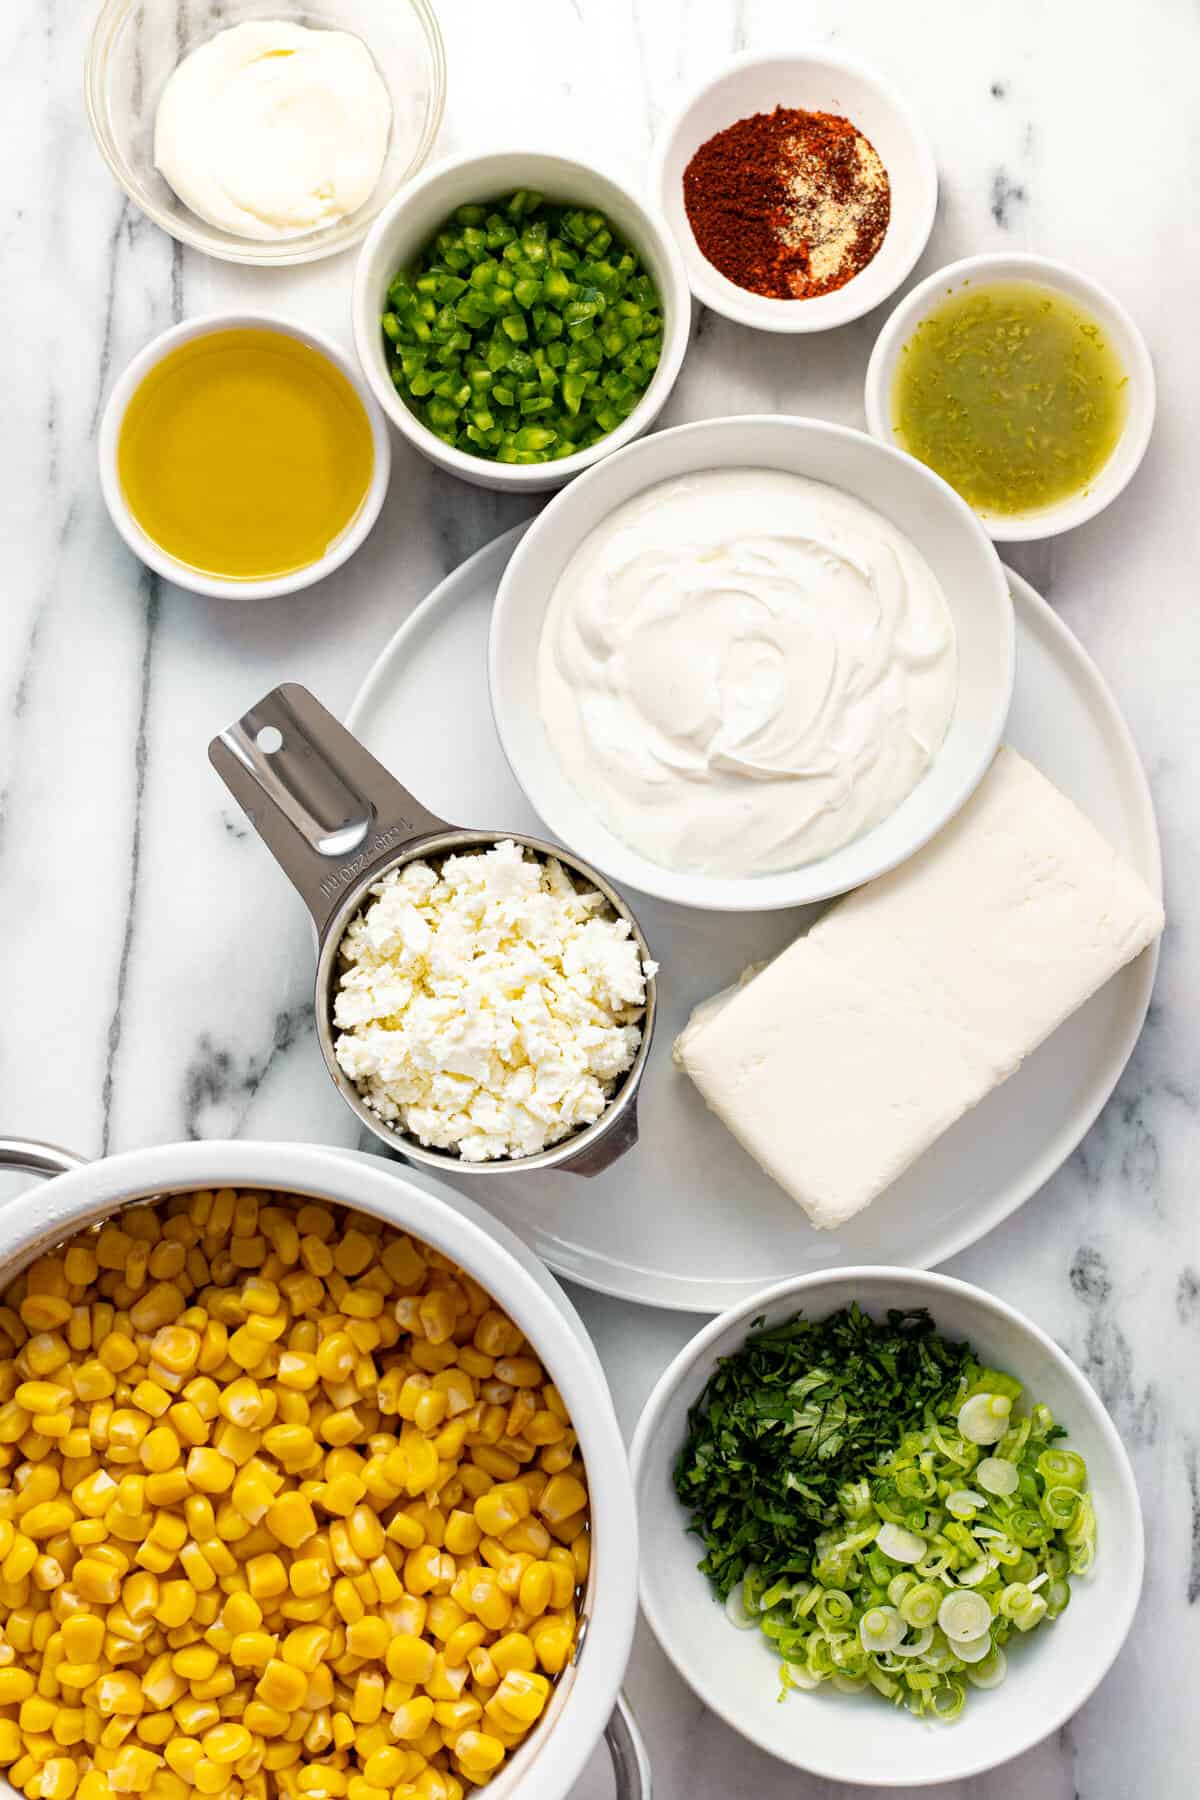 White marble counter top with bowls of ingredients to make creamy corn dip.